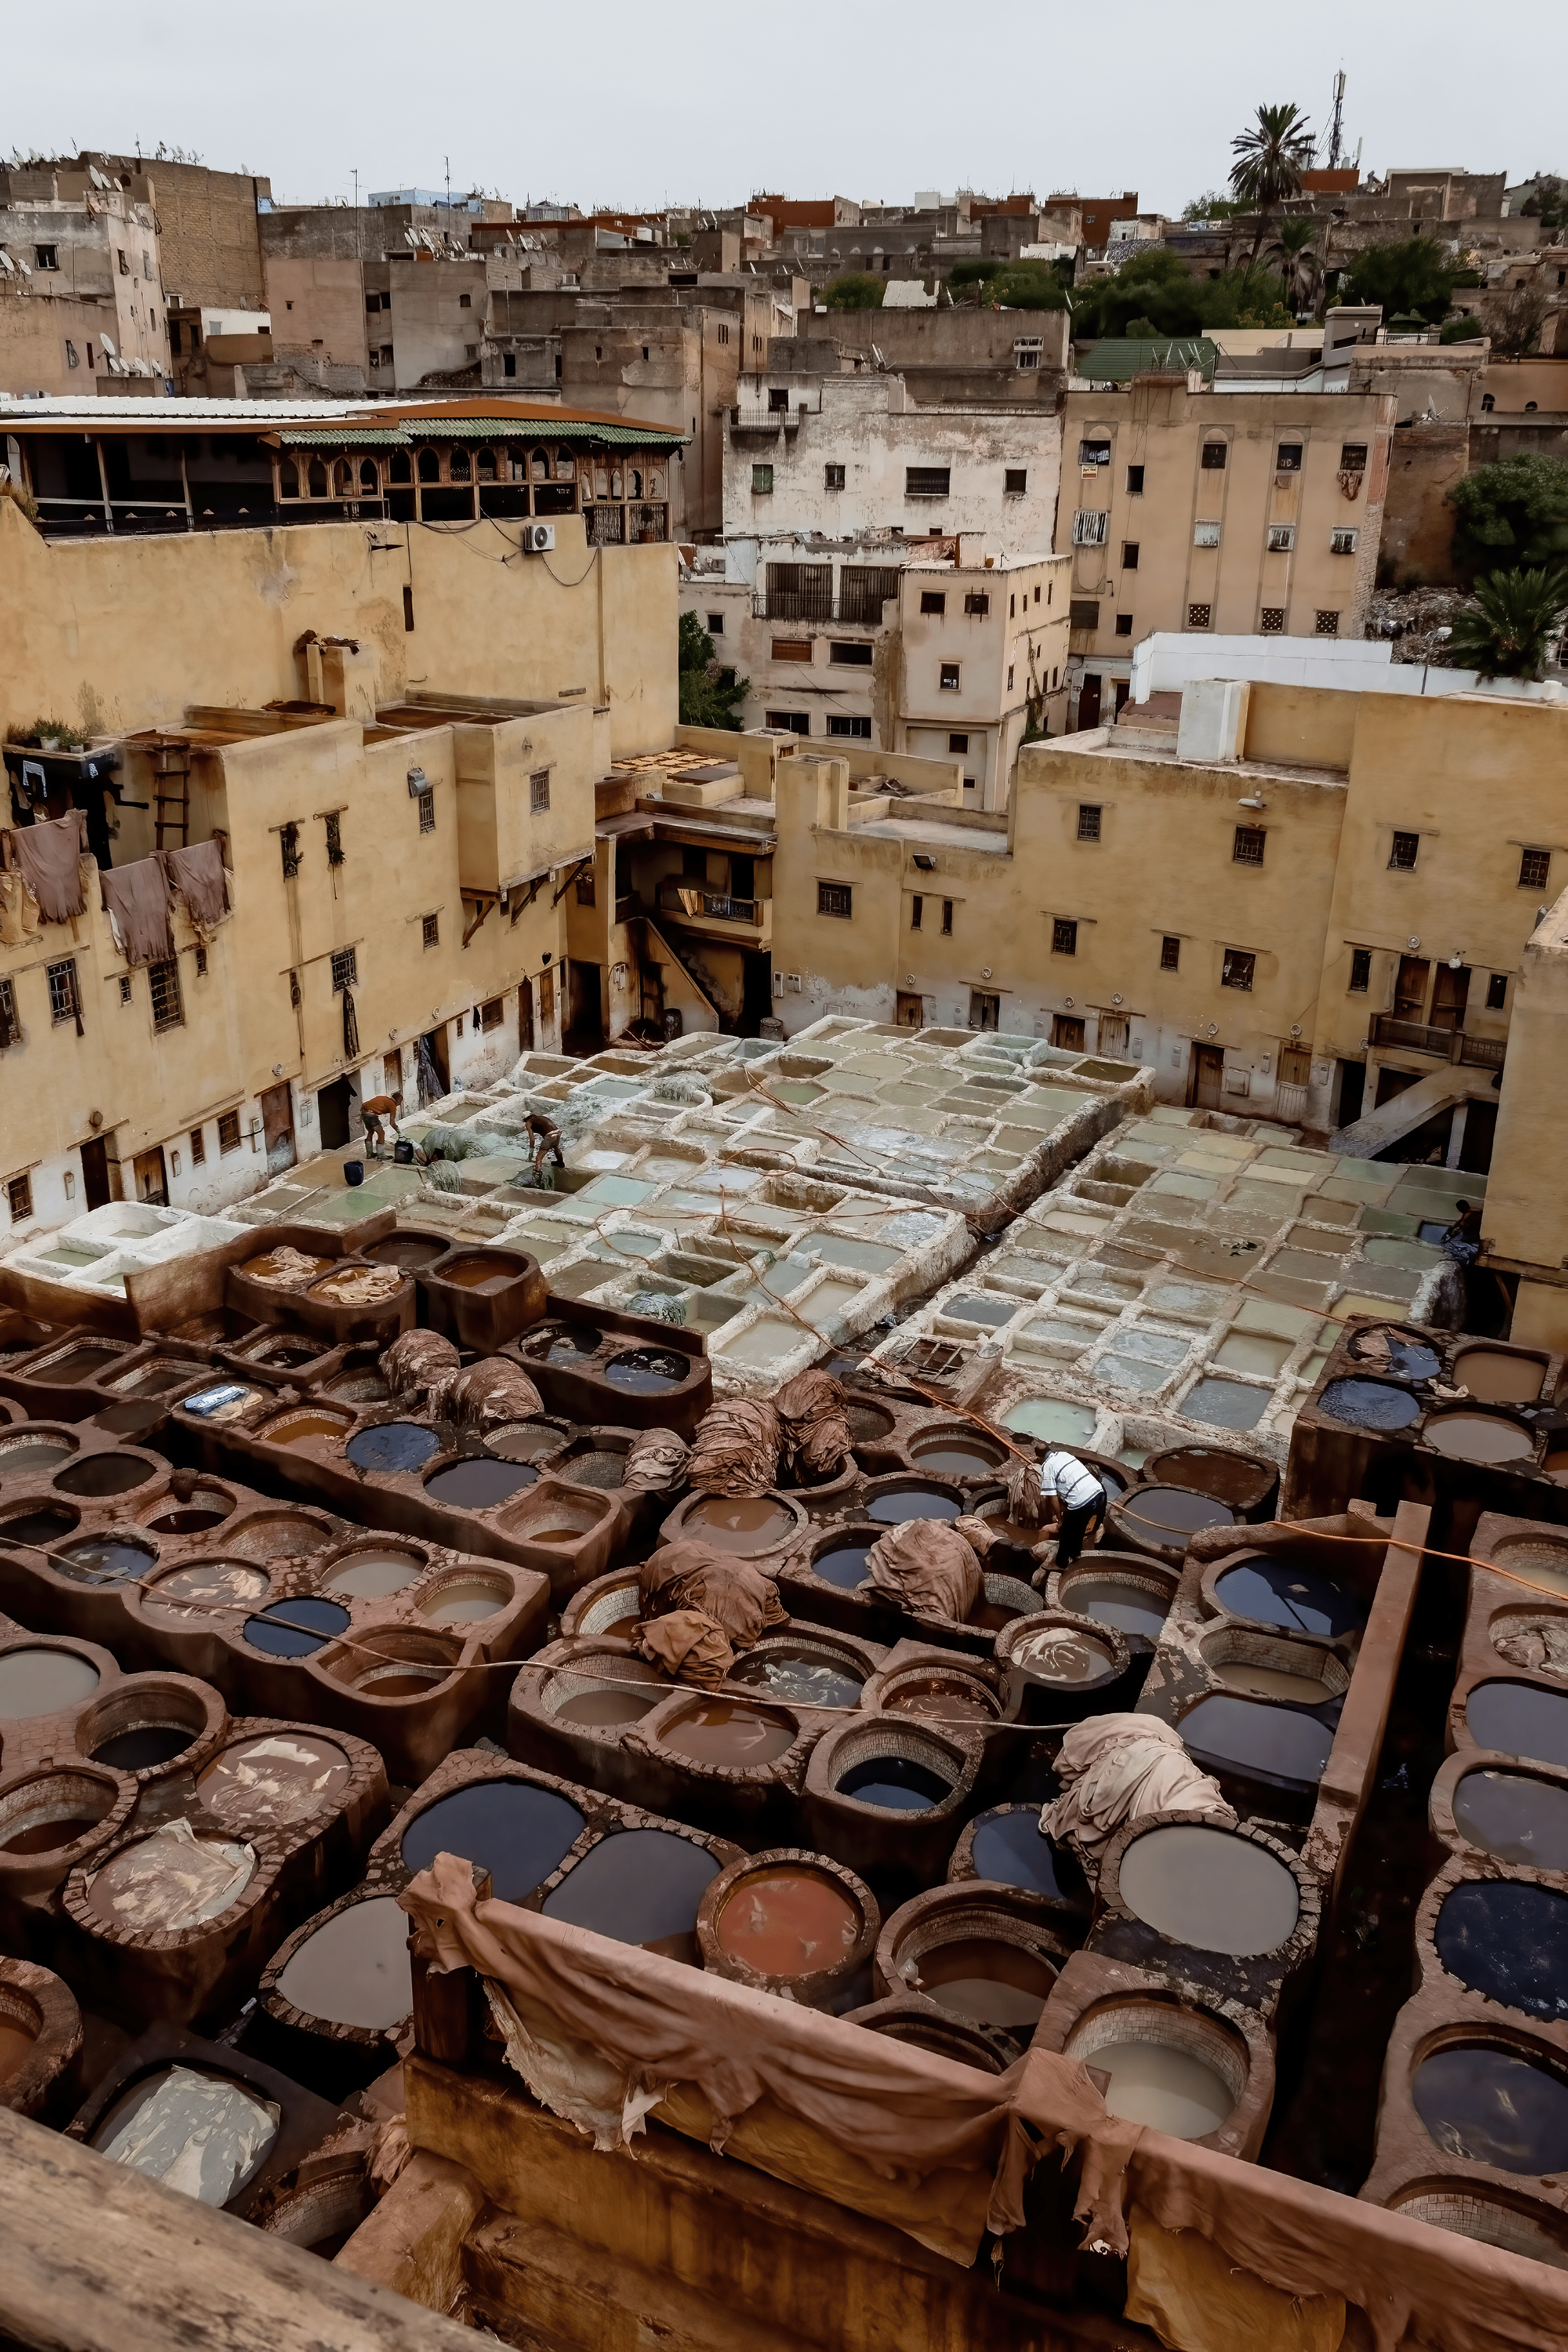 A view of a Moroccan tannery from a high viewpoint. There are around one hundred colors of dye pits and workers putting leather in the dye